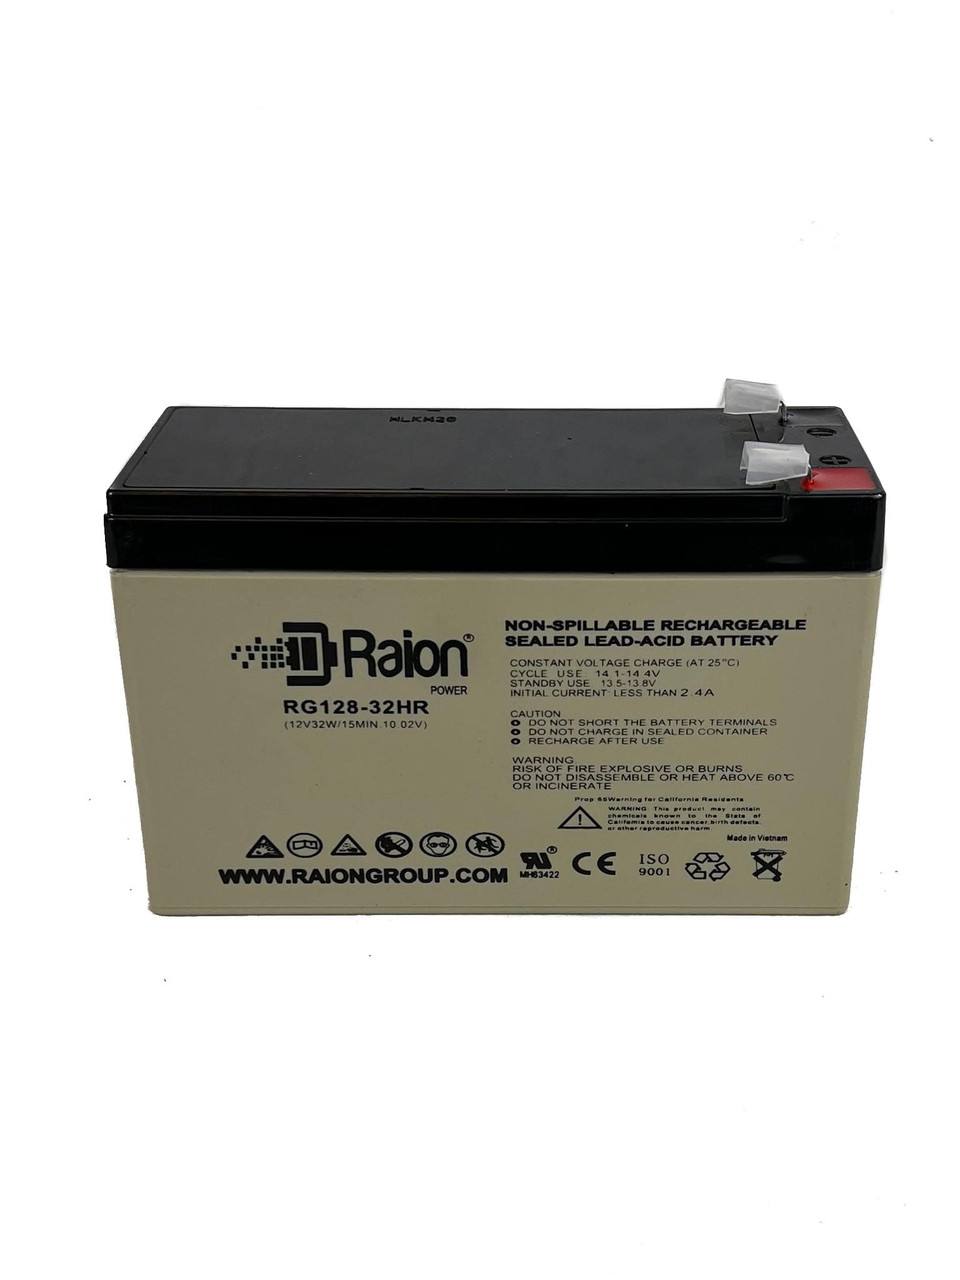 Raion Power RG128-32HR Replacement High Rate Battery Cartridge for Alpha Technologies ALI 1000